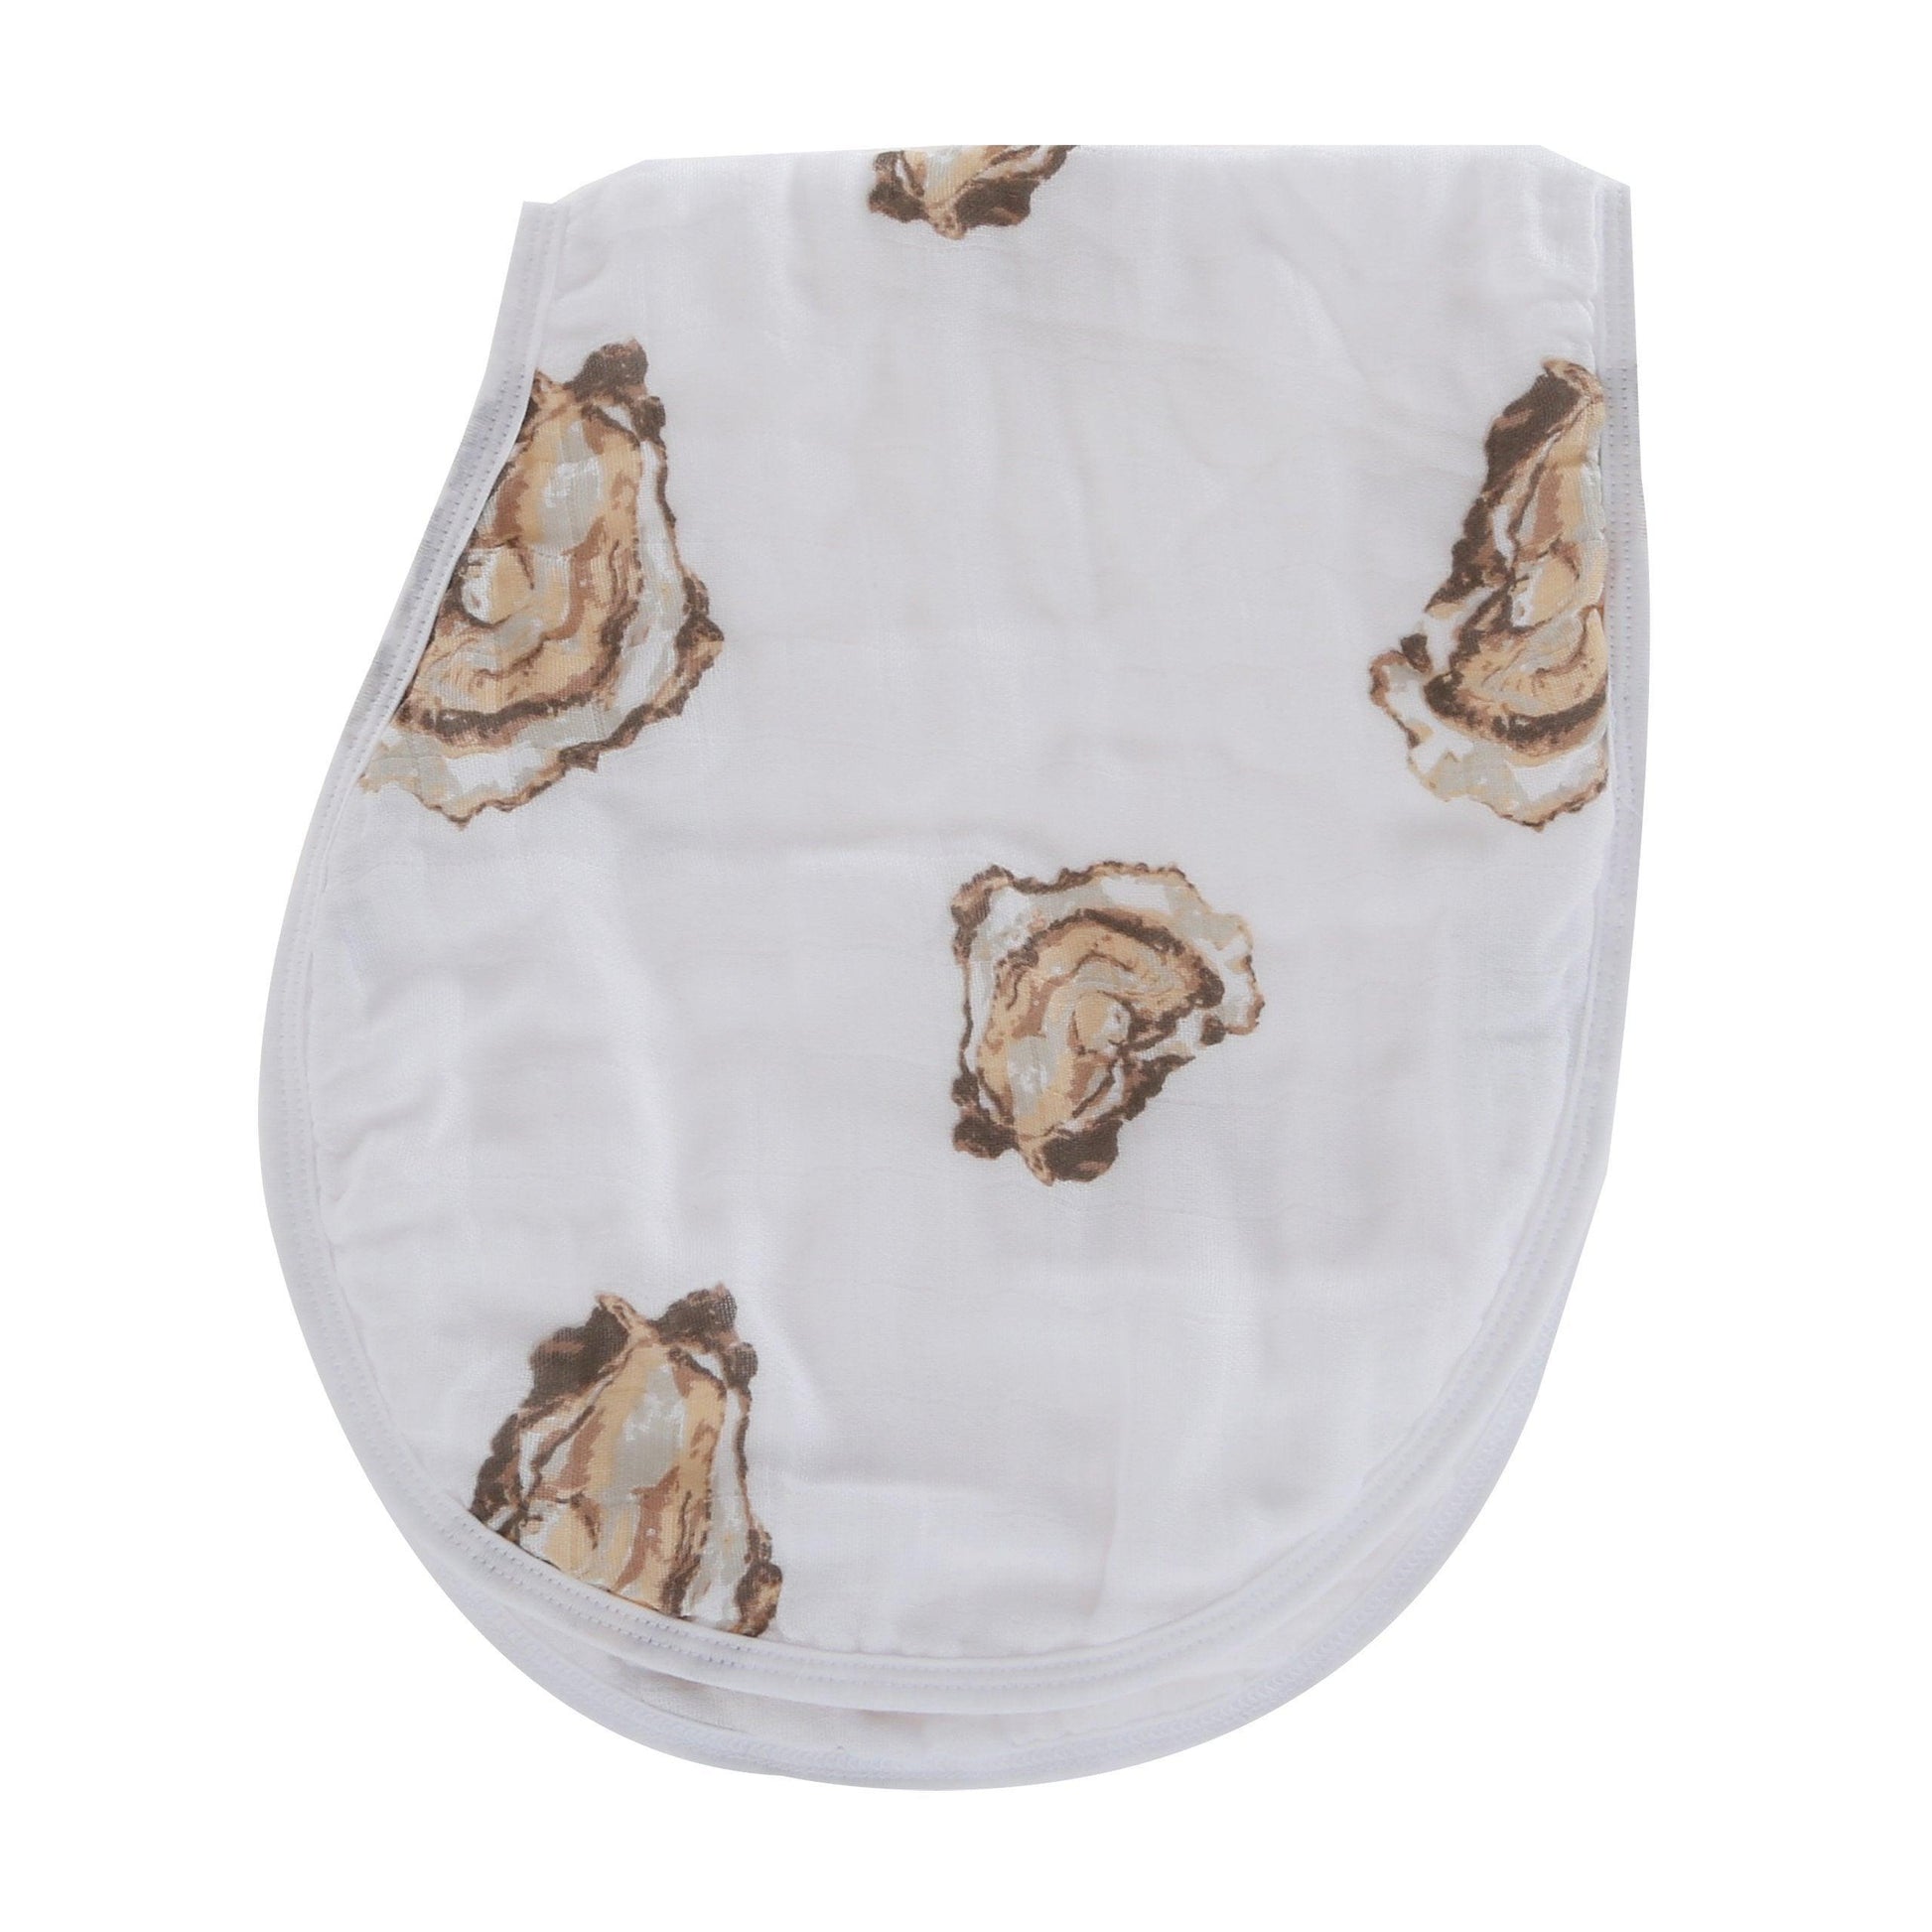 Baby bib and burp cloth set with playful oyster design and "Aw Shucks" text on a white background.